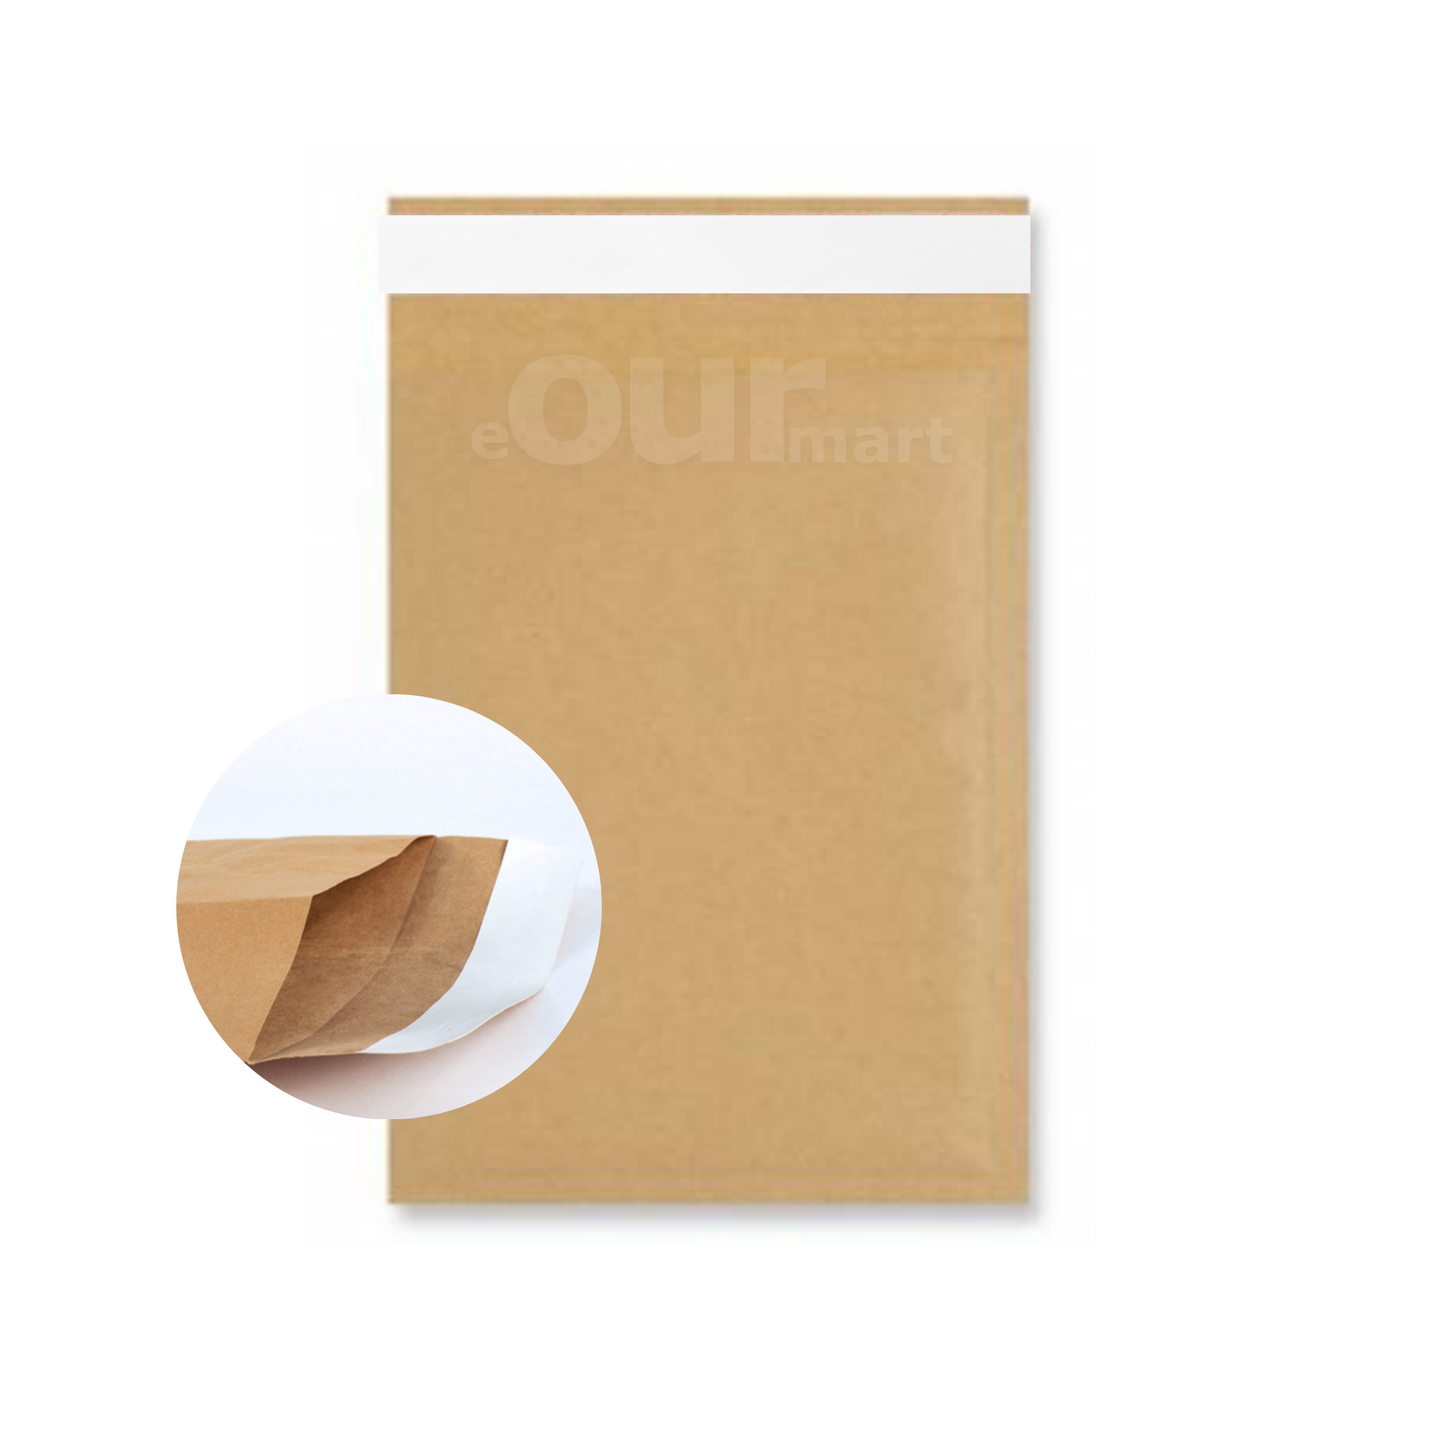 Paper Courier Bags, 12x15 Inches, (PB-3, 100 Bags)